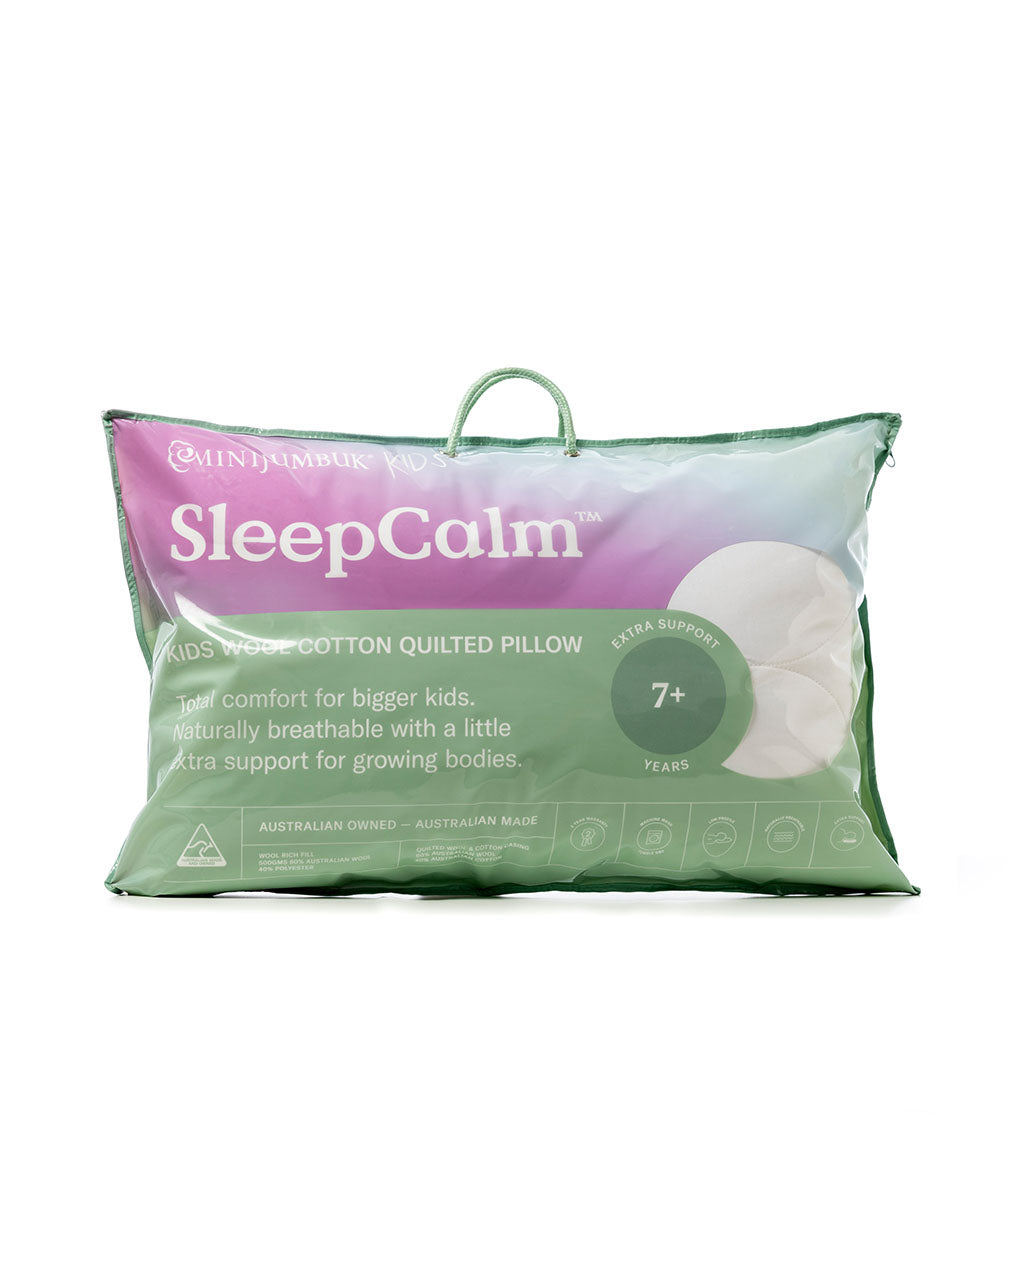 SleepCalm™ Kids Wool Cotton Quilted Pillow (7+ Years)